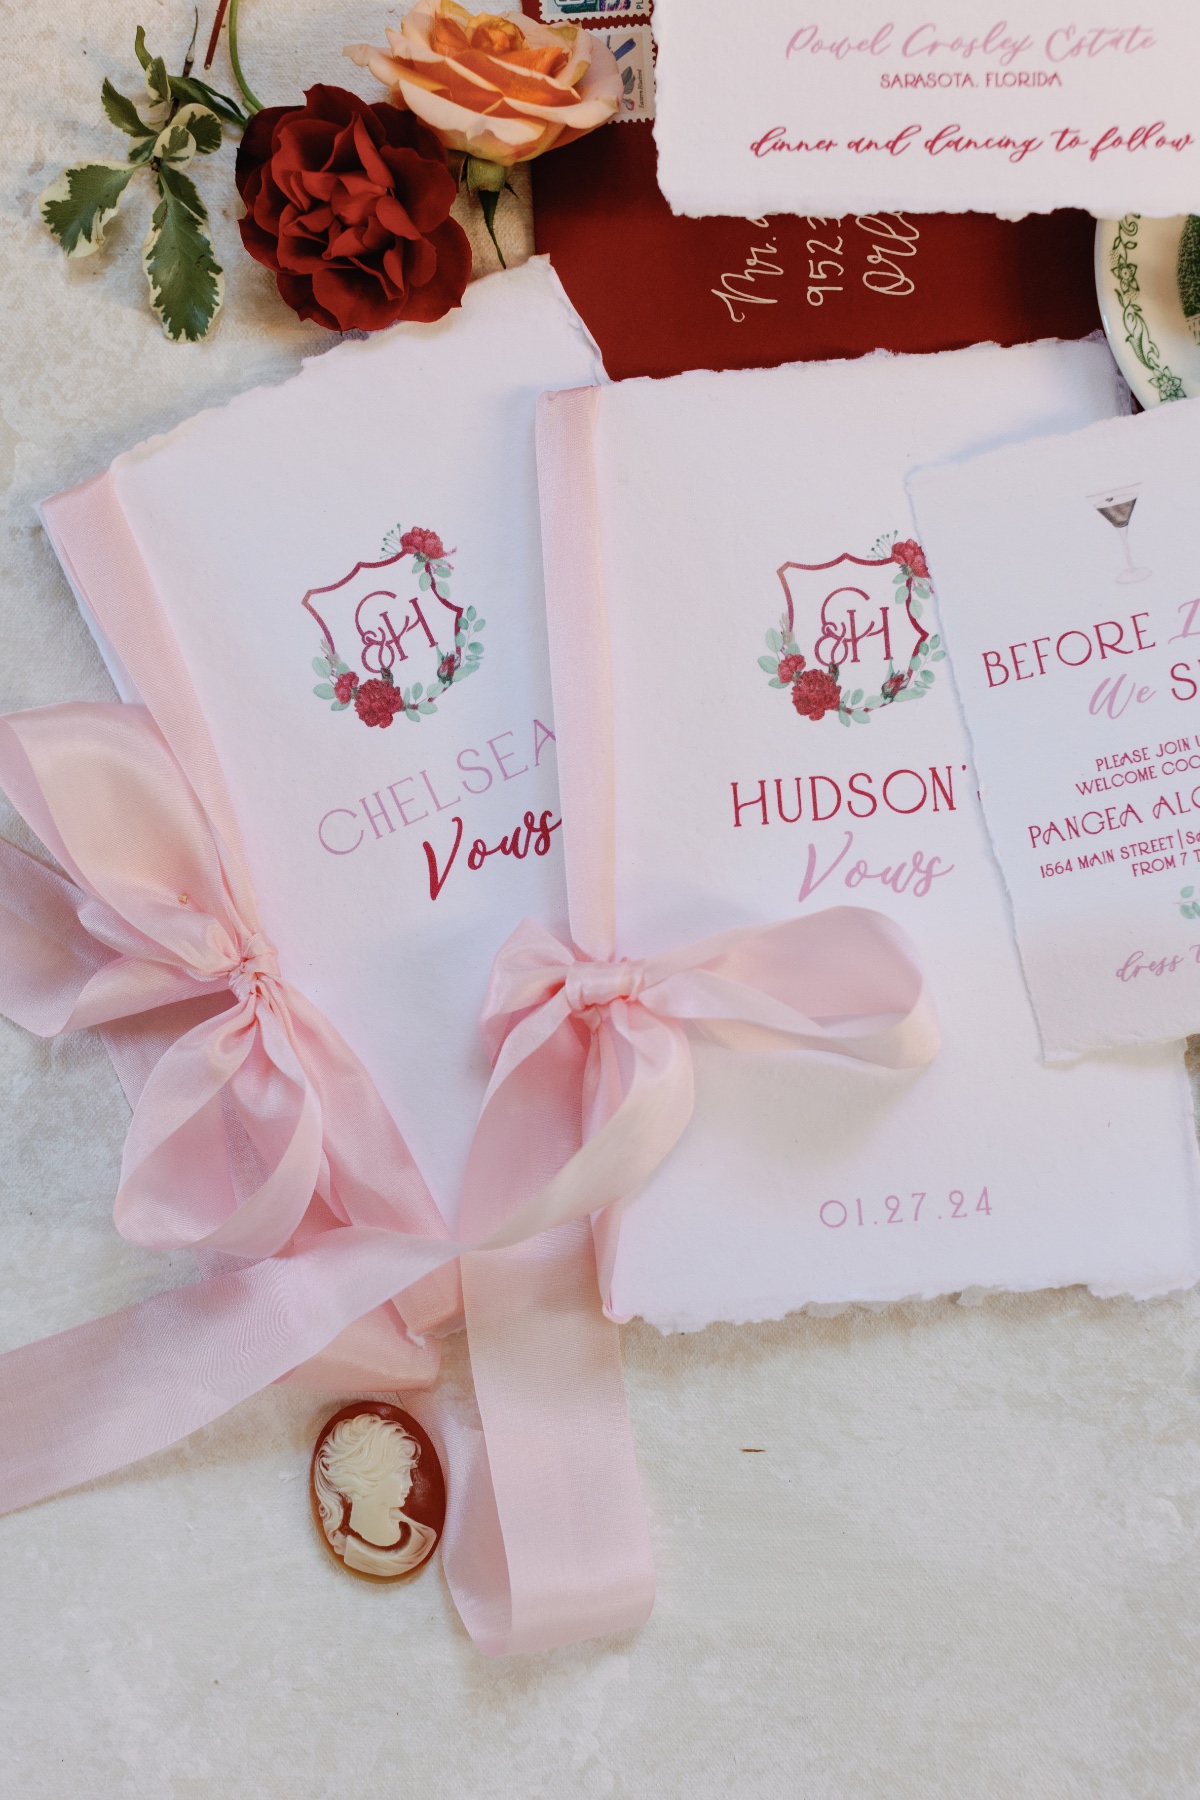 Red and white wedding invitations with pink ribbon bows